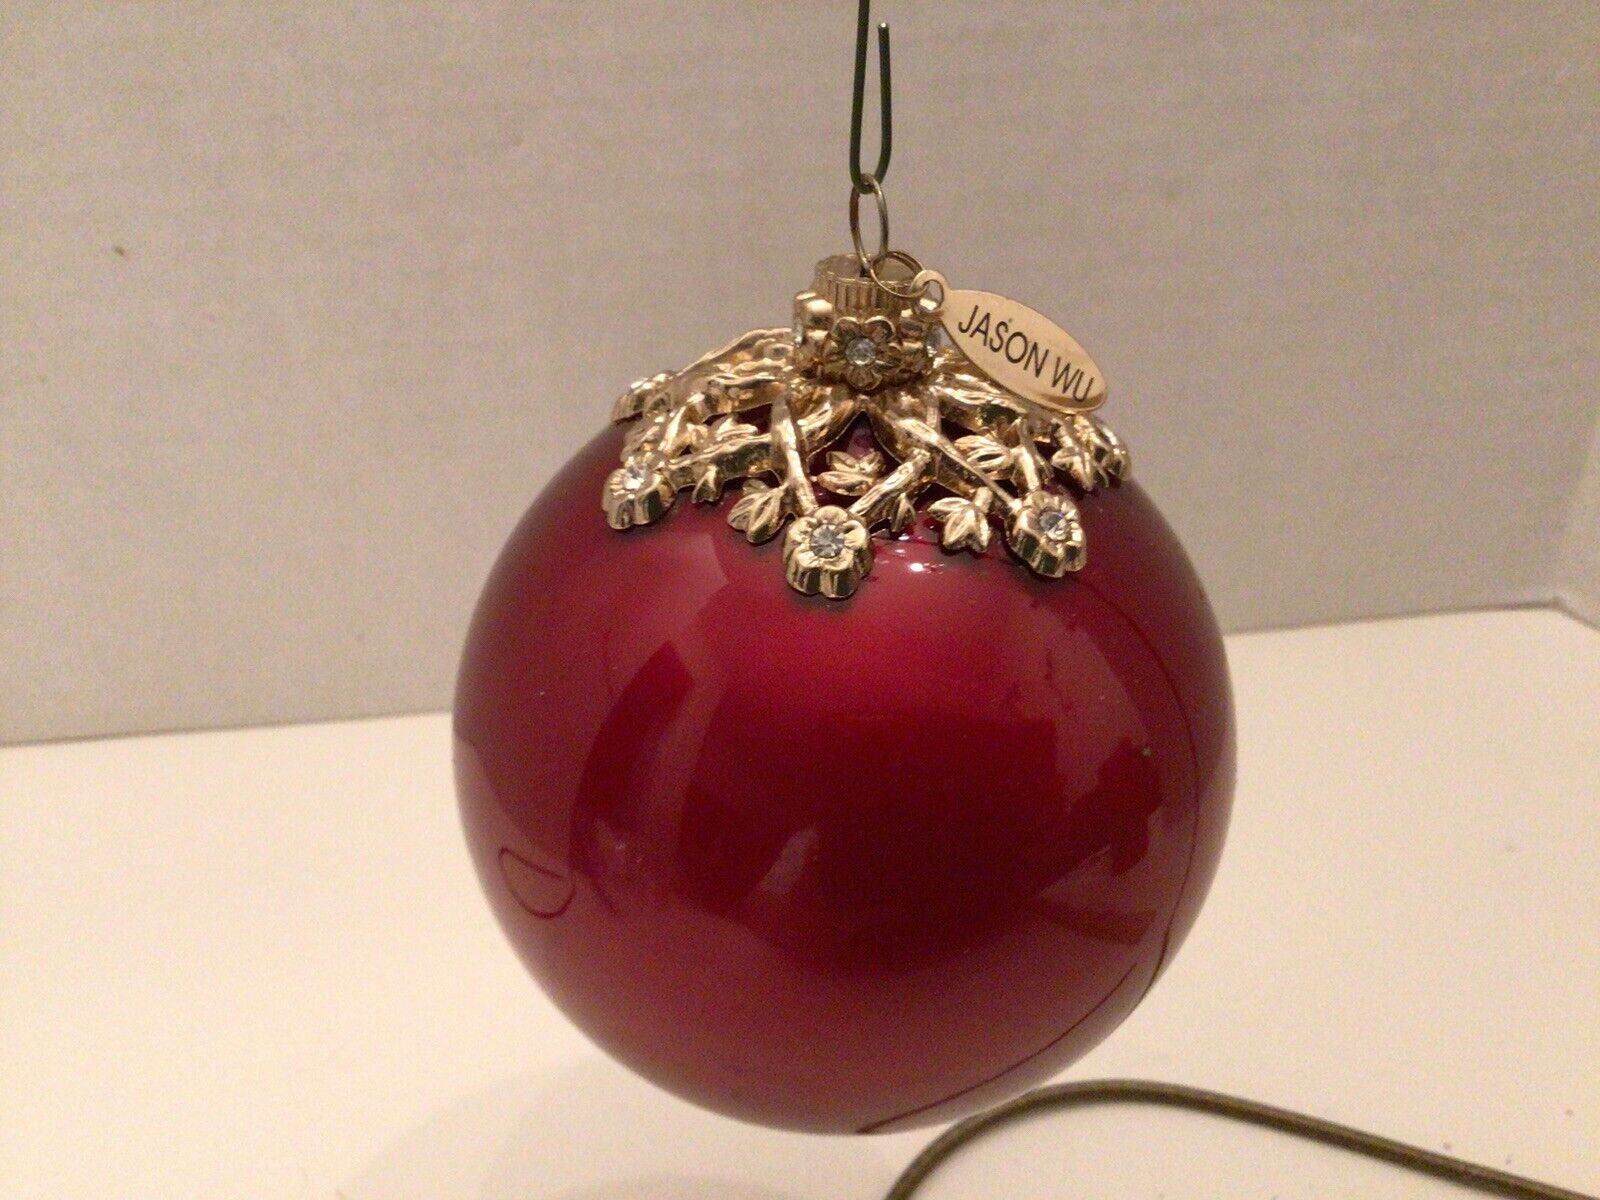 Vintage Jason Wu Red And Gold Ornament 3” Diameter Heavy So Pretty